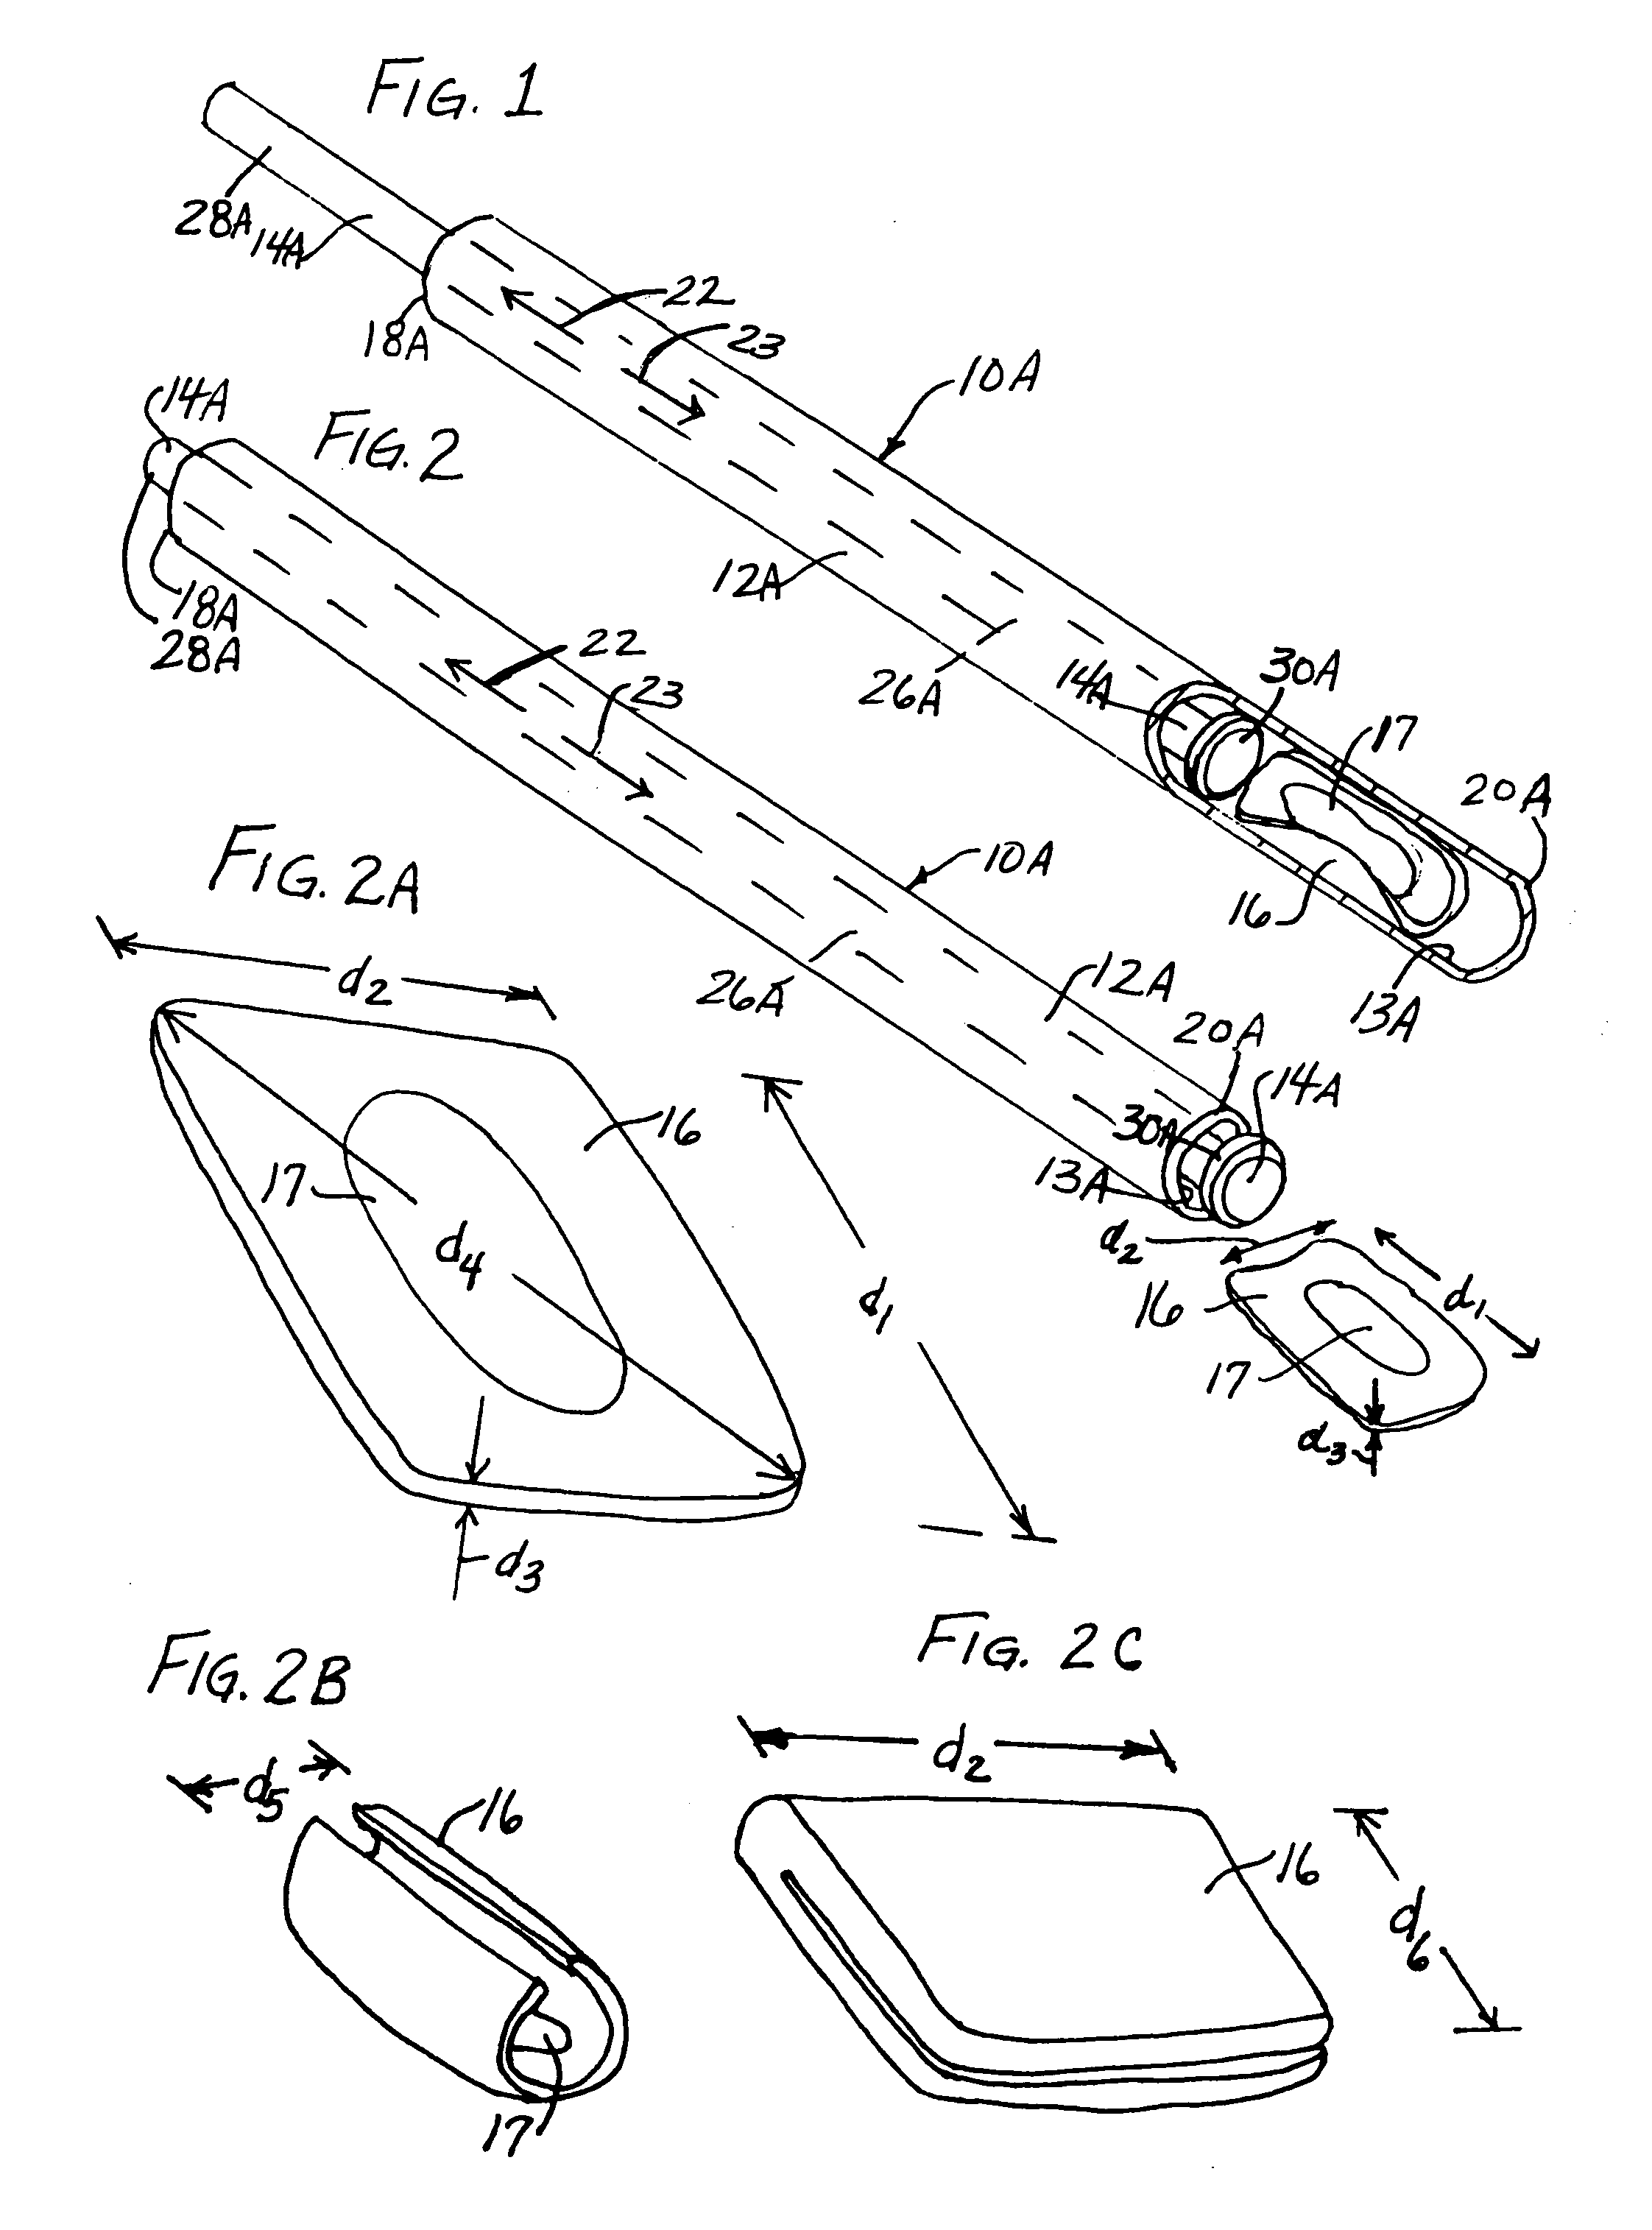 Implant delivery instrument